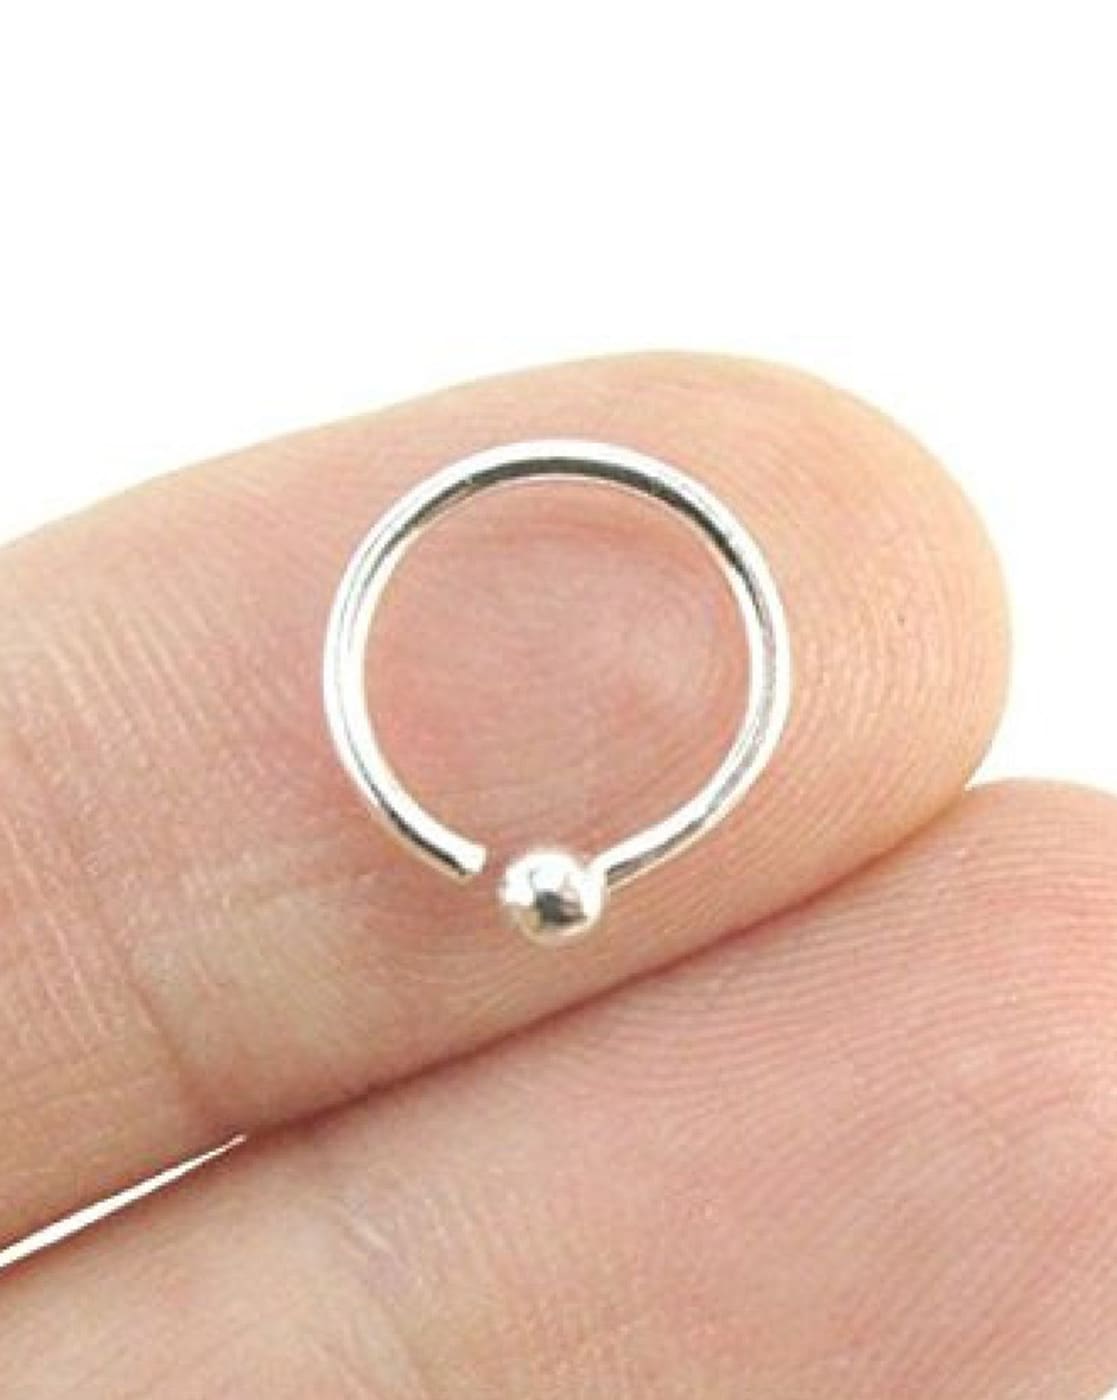 Nose Piercing, Silver Nose Hoop, Nose Jewelry, Tiny Nose Ring, Small Nose  Ring, Tribal Nose Ring,